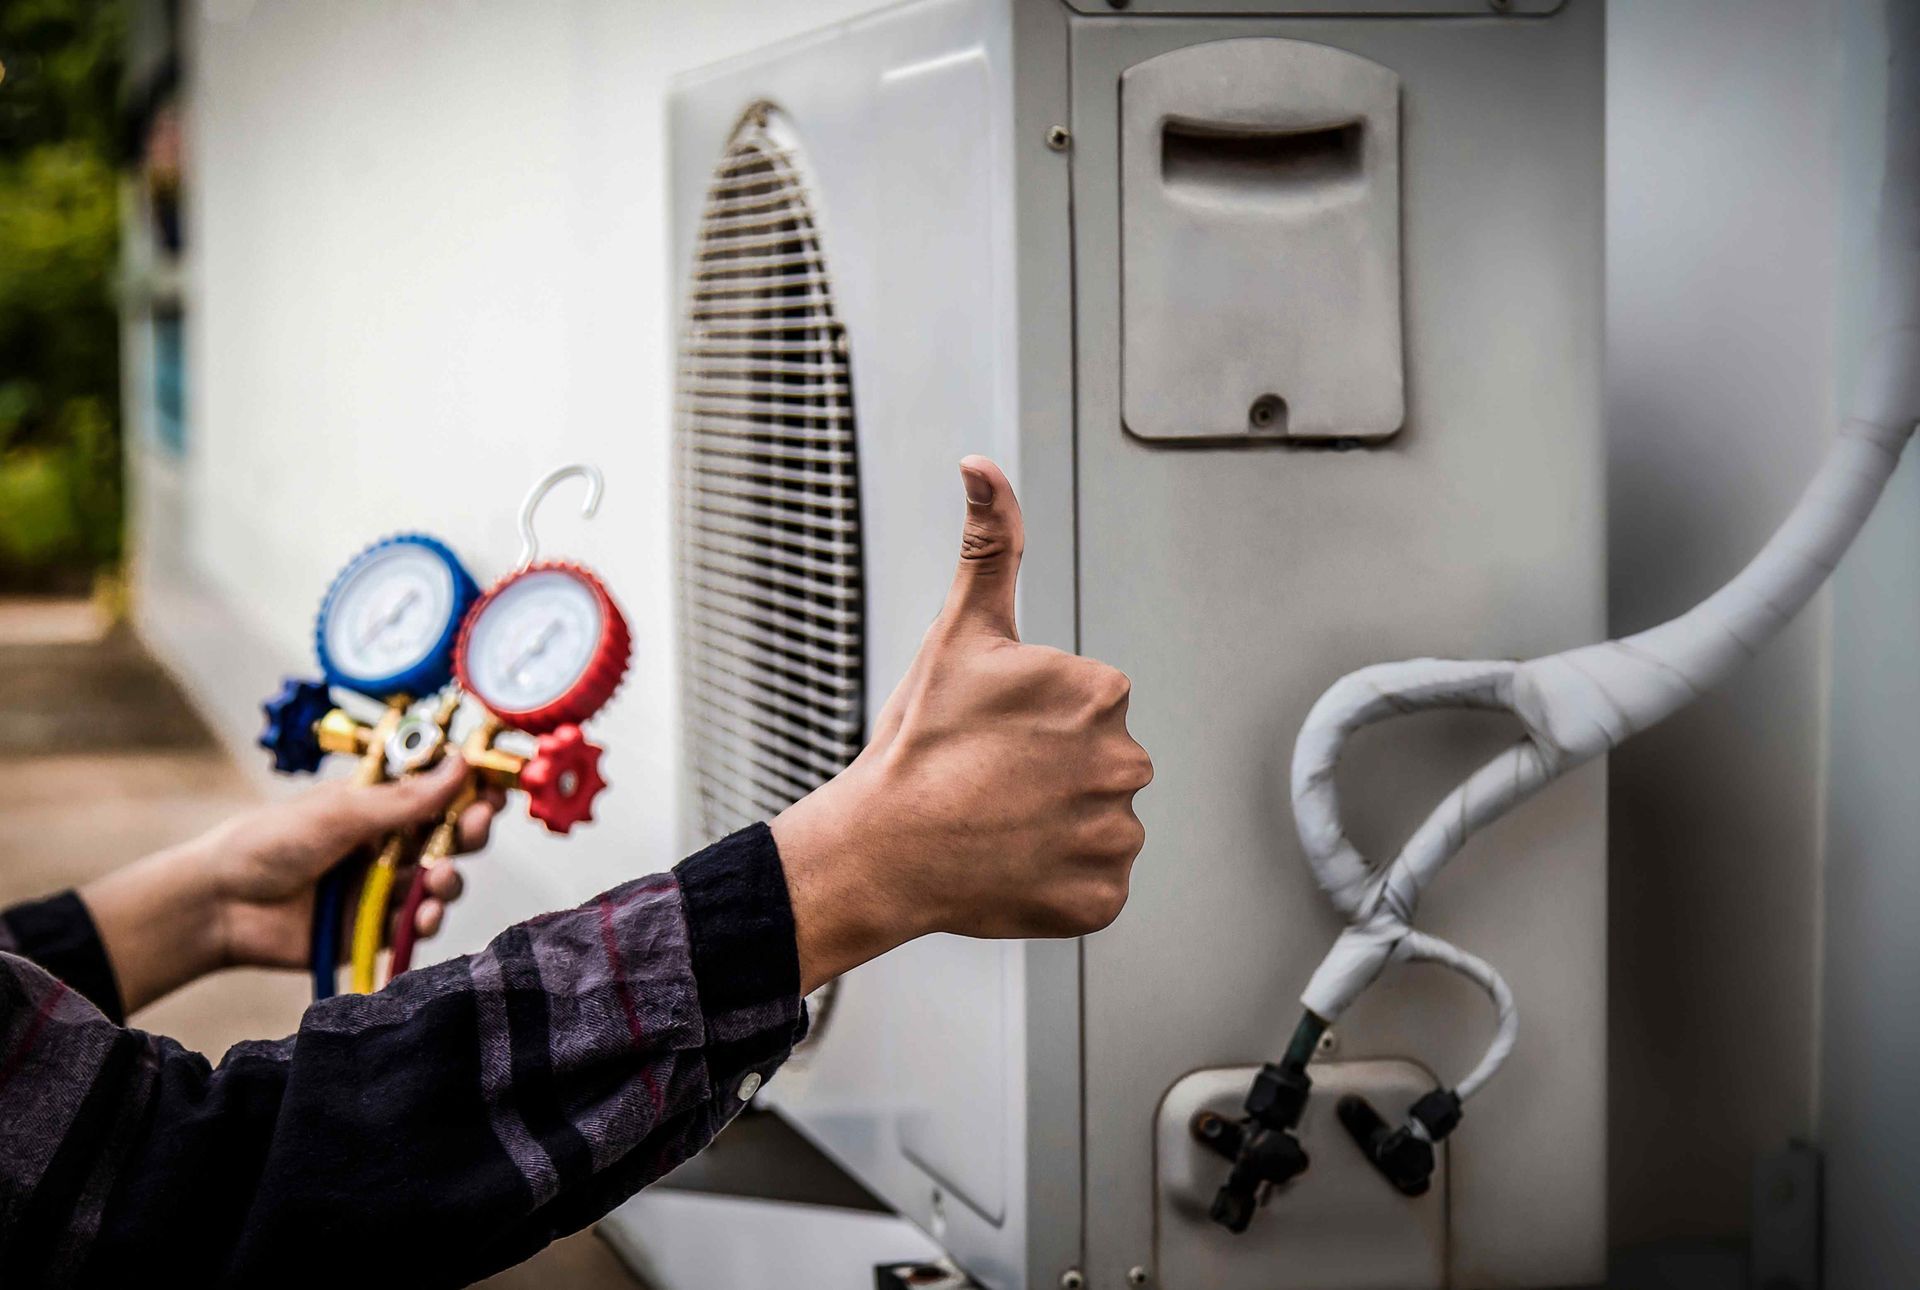 outdoor air conditioner after installation with an electrician's hand giving a  thumbs up in the middle of the picture